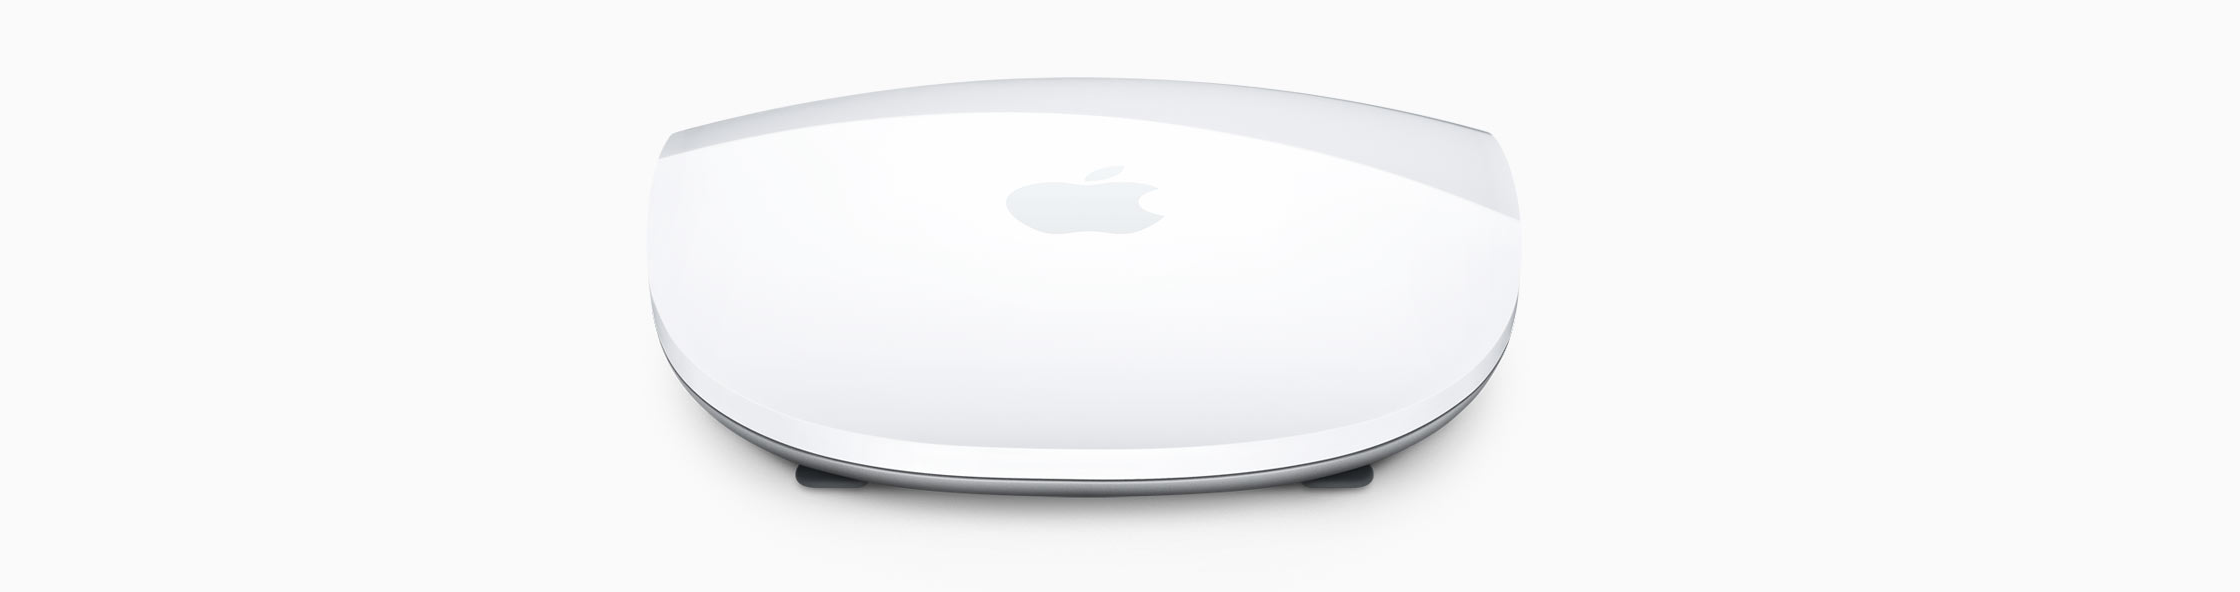 Screen Shot 2015 10 13 at 10.09.54 PM - Apple launches the Magic Trackpad 2 with Force Touch, Magic Mouse 2 & Magic Keyboard